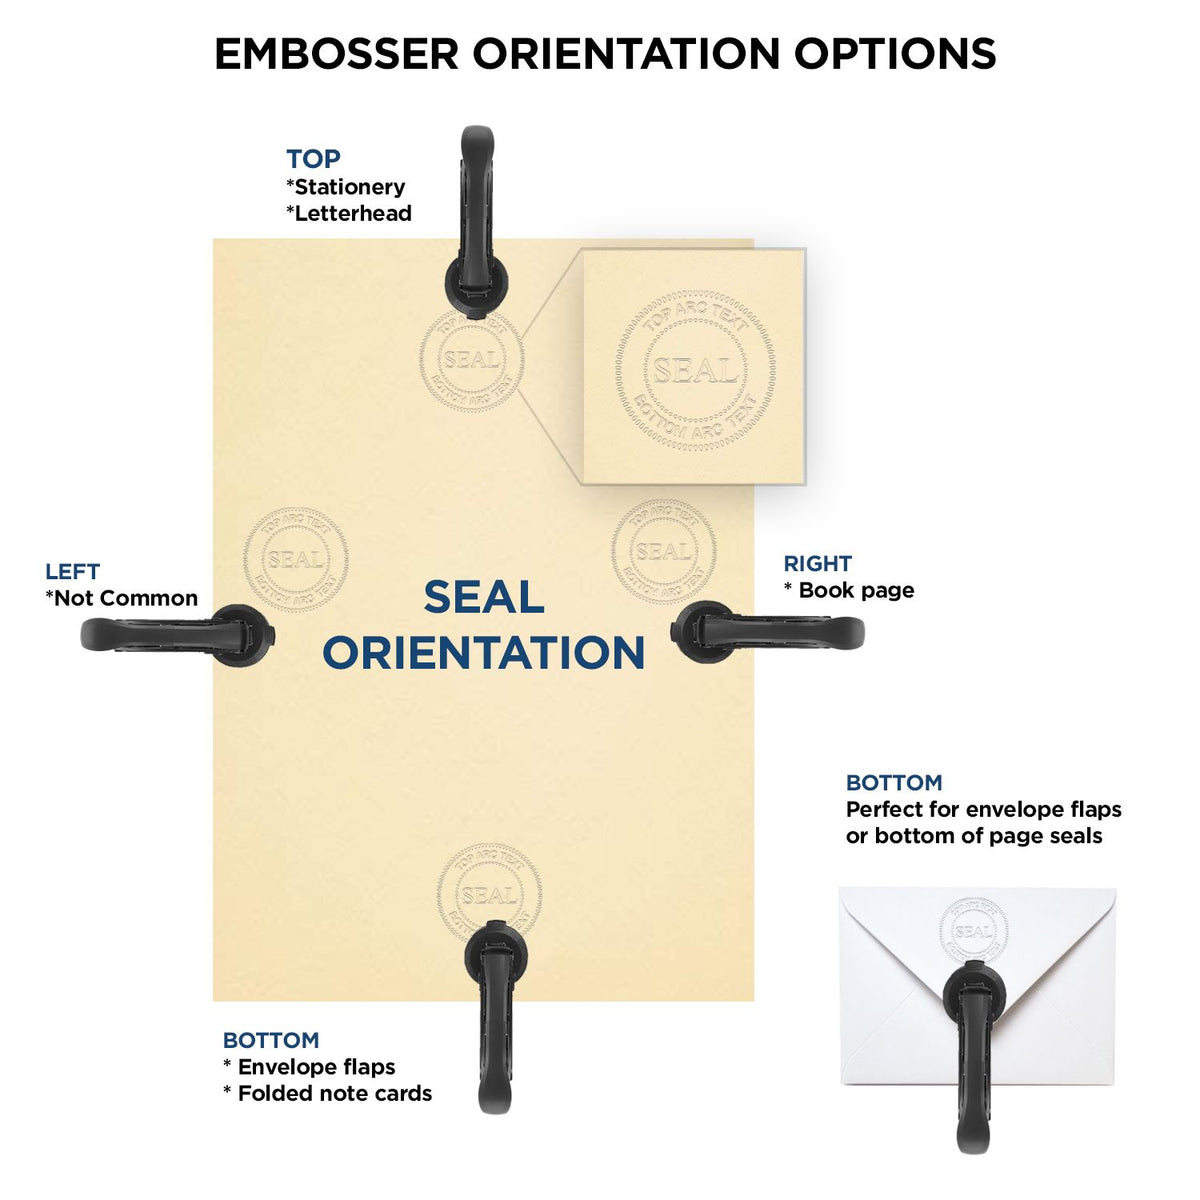 An infographic for the Heavy Duty Cast Iron South Carolina Geologist Seal Embosser showing embosser orientation, this is showing examples of a top, bottom, right and left insert.